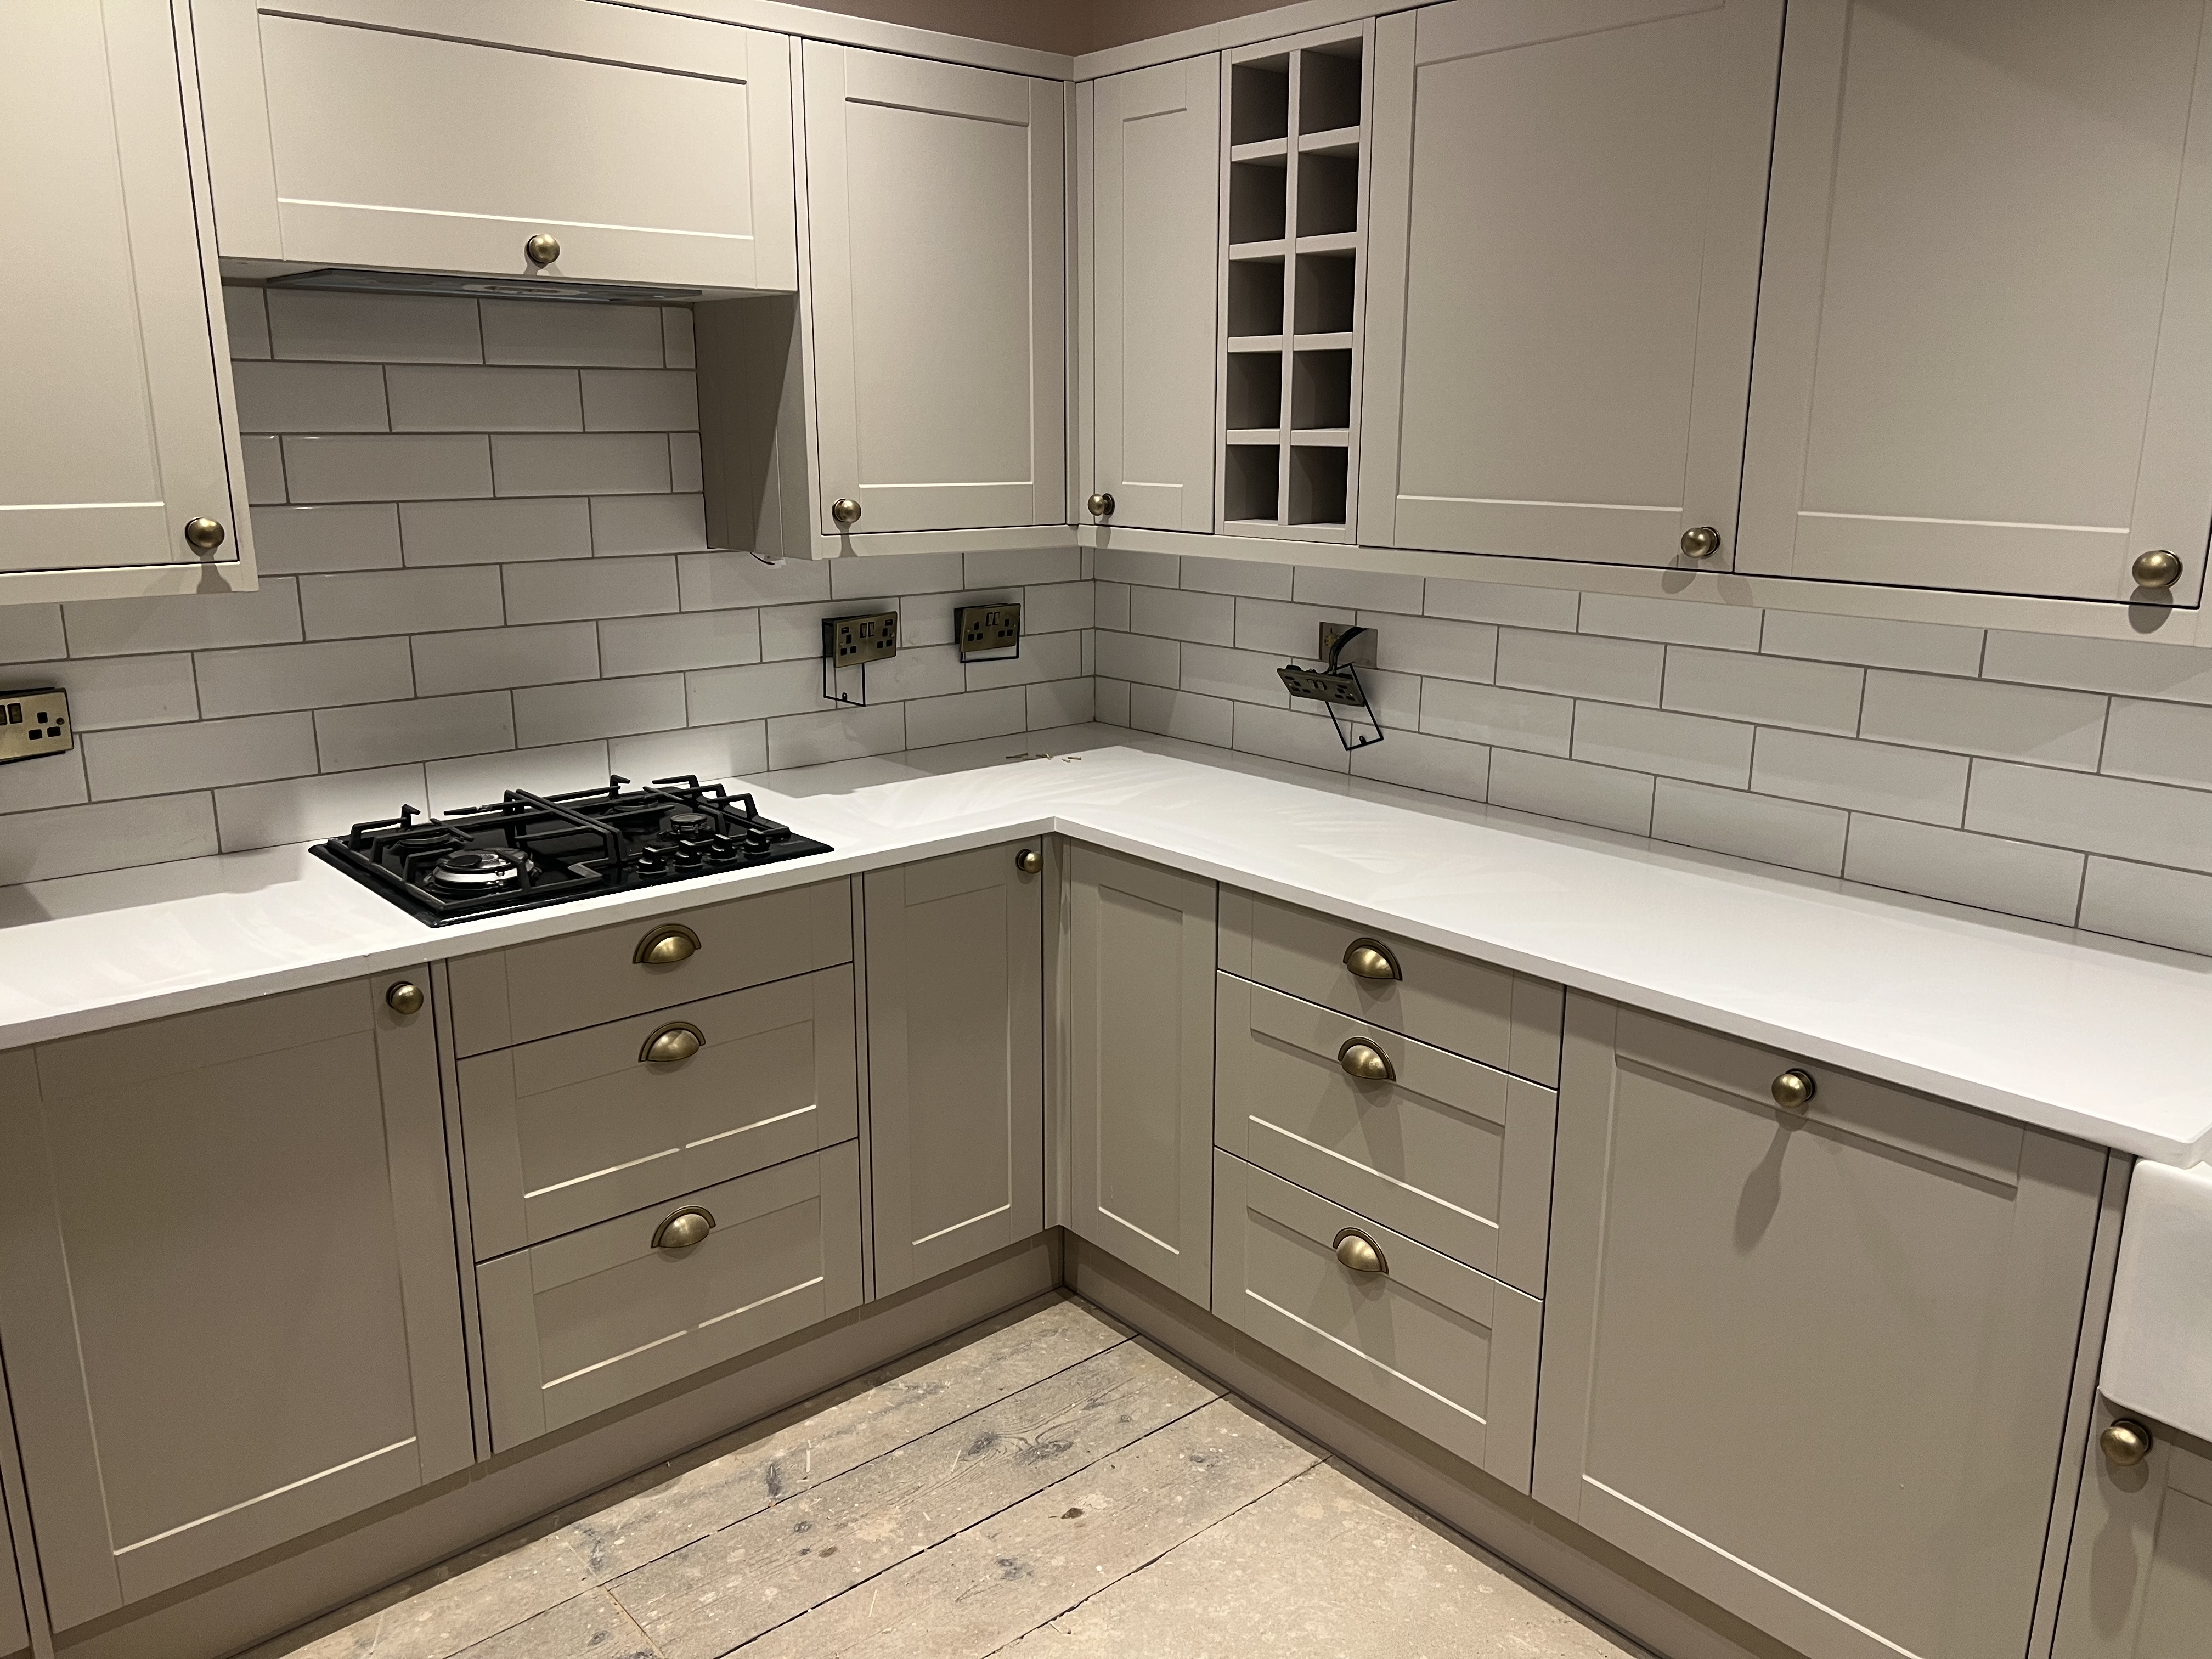 Fitted kitchen with tiled back splash